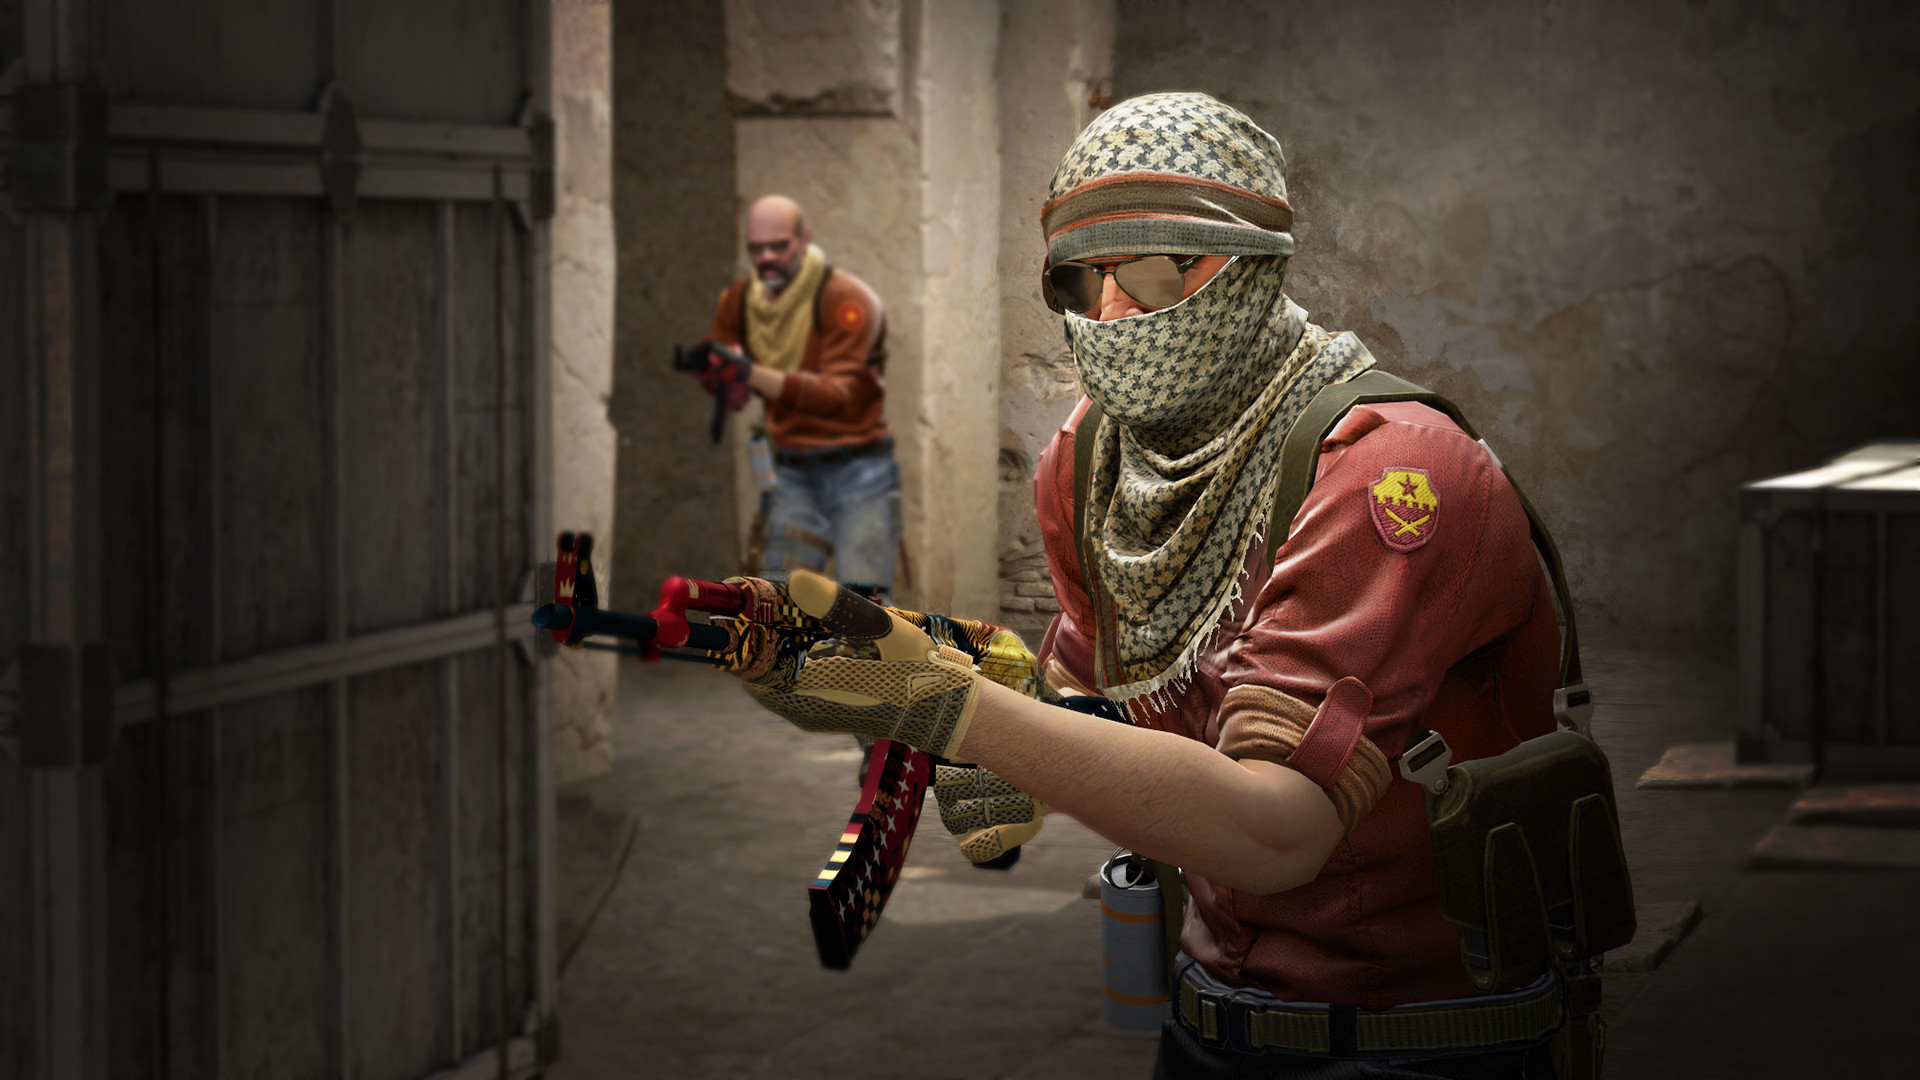 Counter Strike 2: how to download and play the limited test right now -  Mirror Online